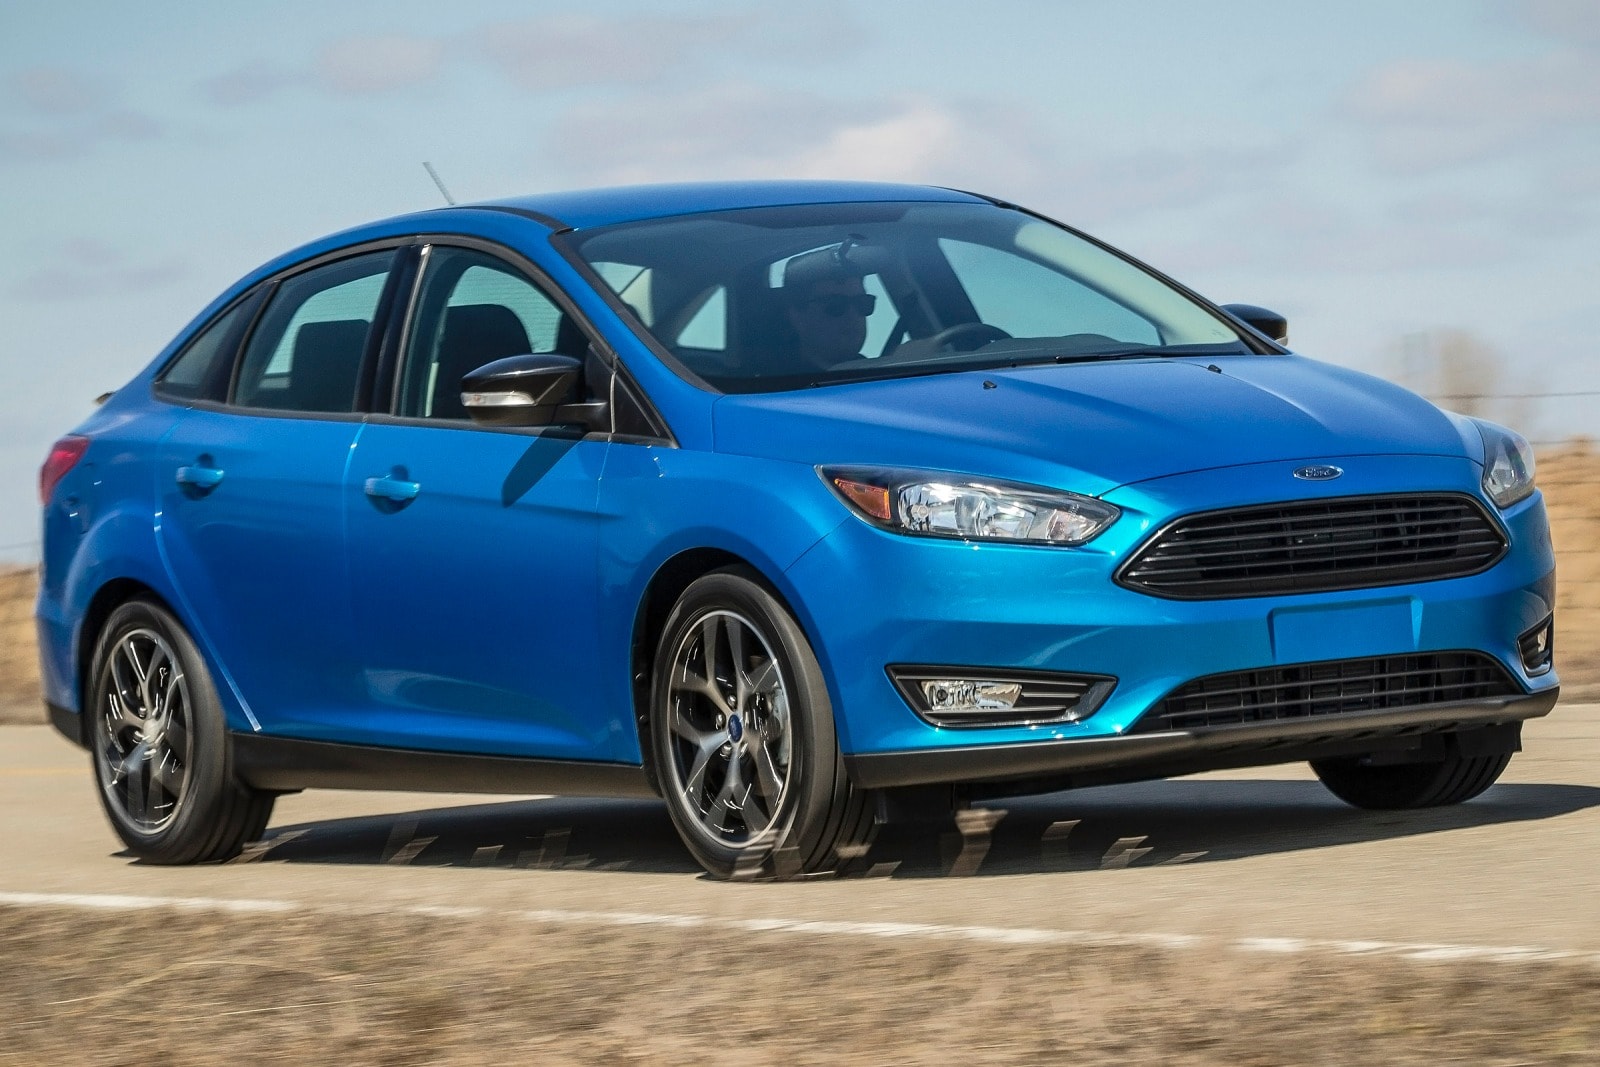 2015 Ford Focus Review & Ratings | Edmunds